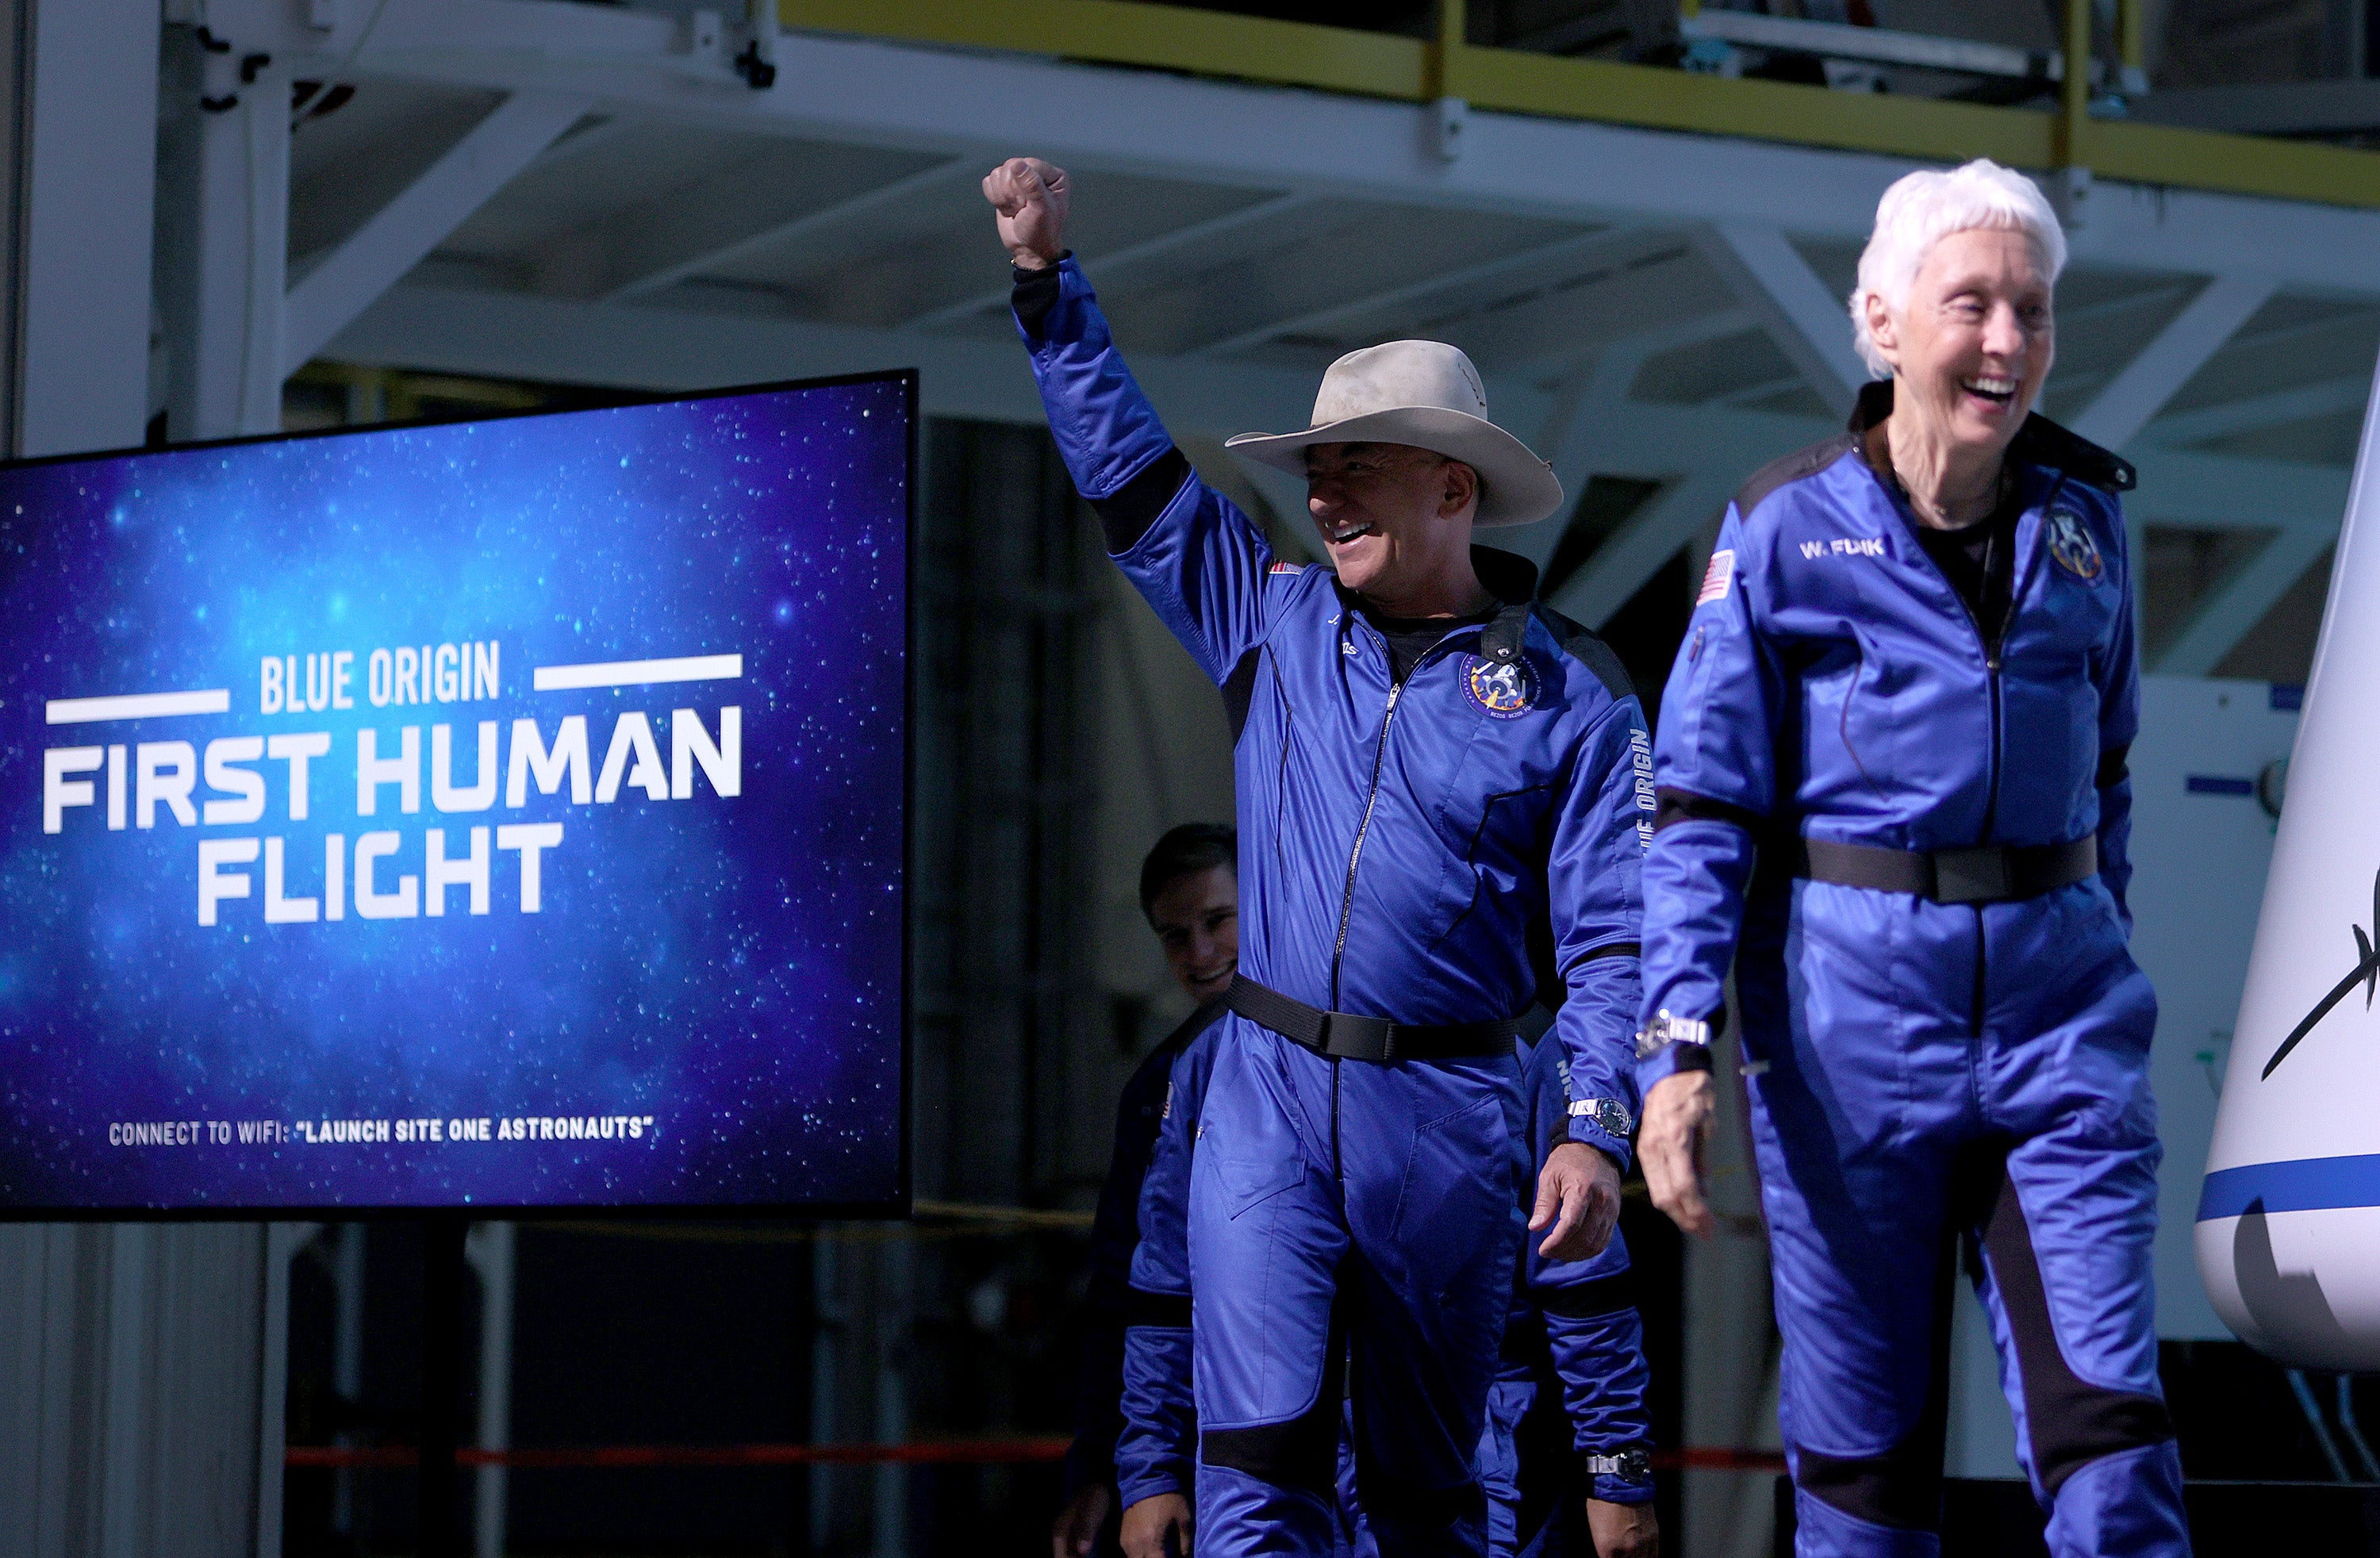 Blue Origin’s New Shepard crew (L-R) Jeff Bezos and Wally Funk arrive for a press conference after flying into space in the Blue Origin New Shepard rocket